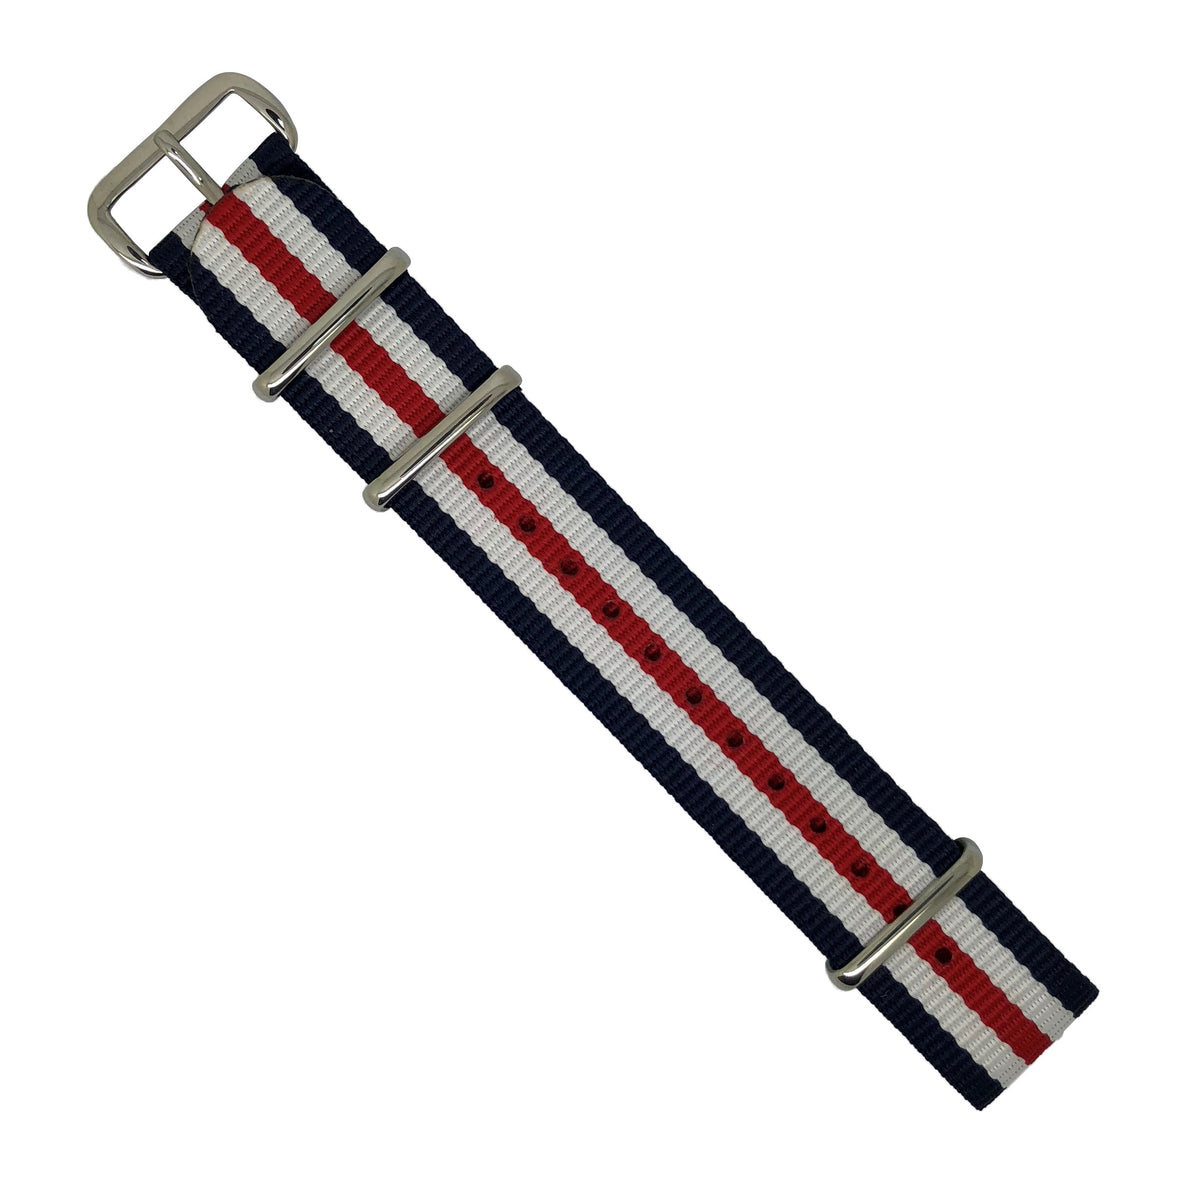 Premium Nato Strap in Regimental with Polished Silver Buckle (18mm) - Nomad watch Works